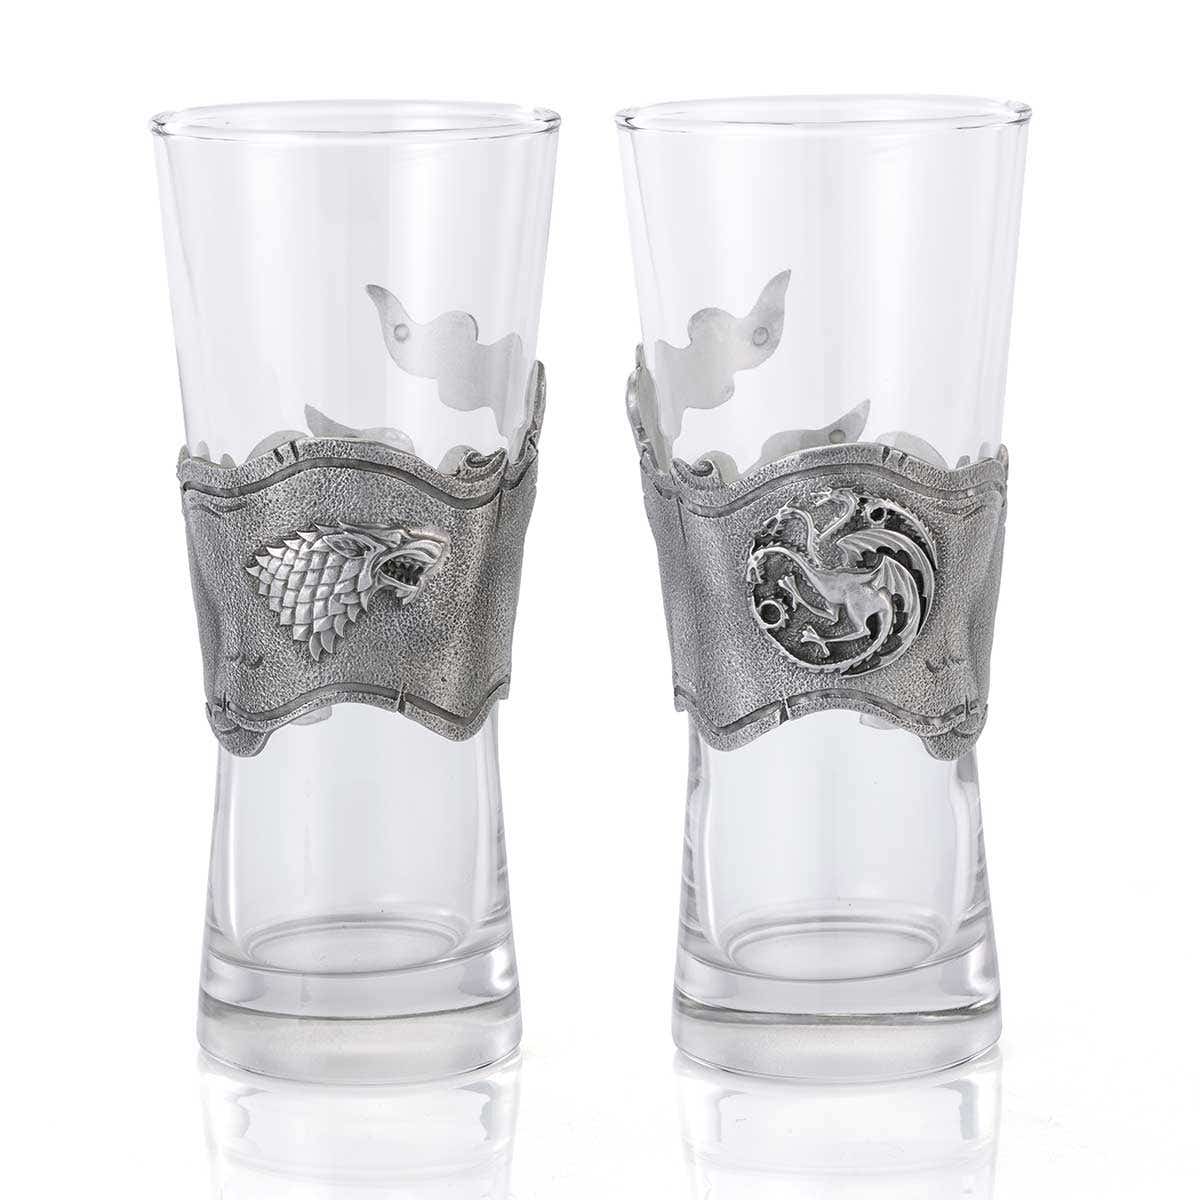 Royal Selangor GAME OF THRONES Ice & Fire Pilsner (30cL)